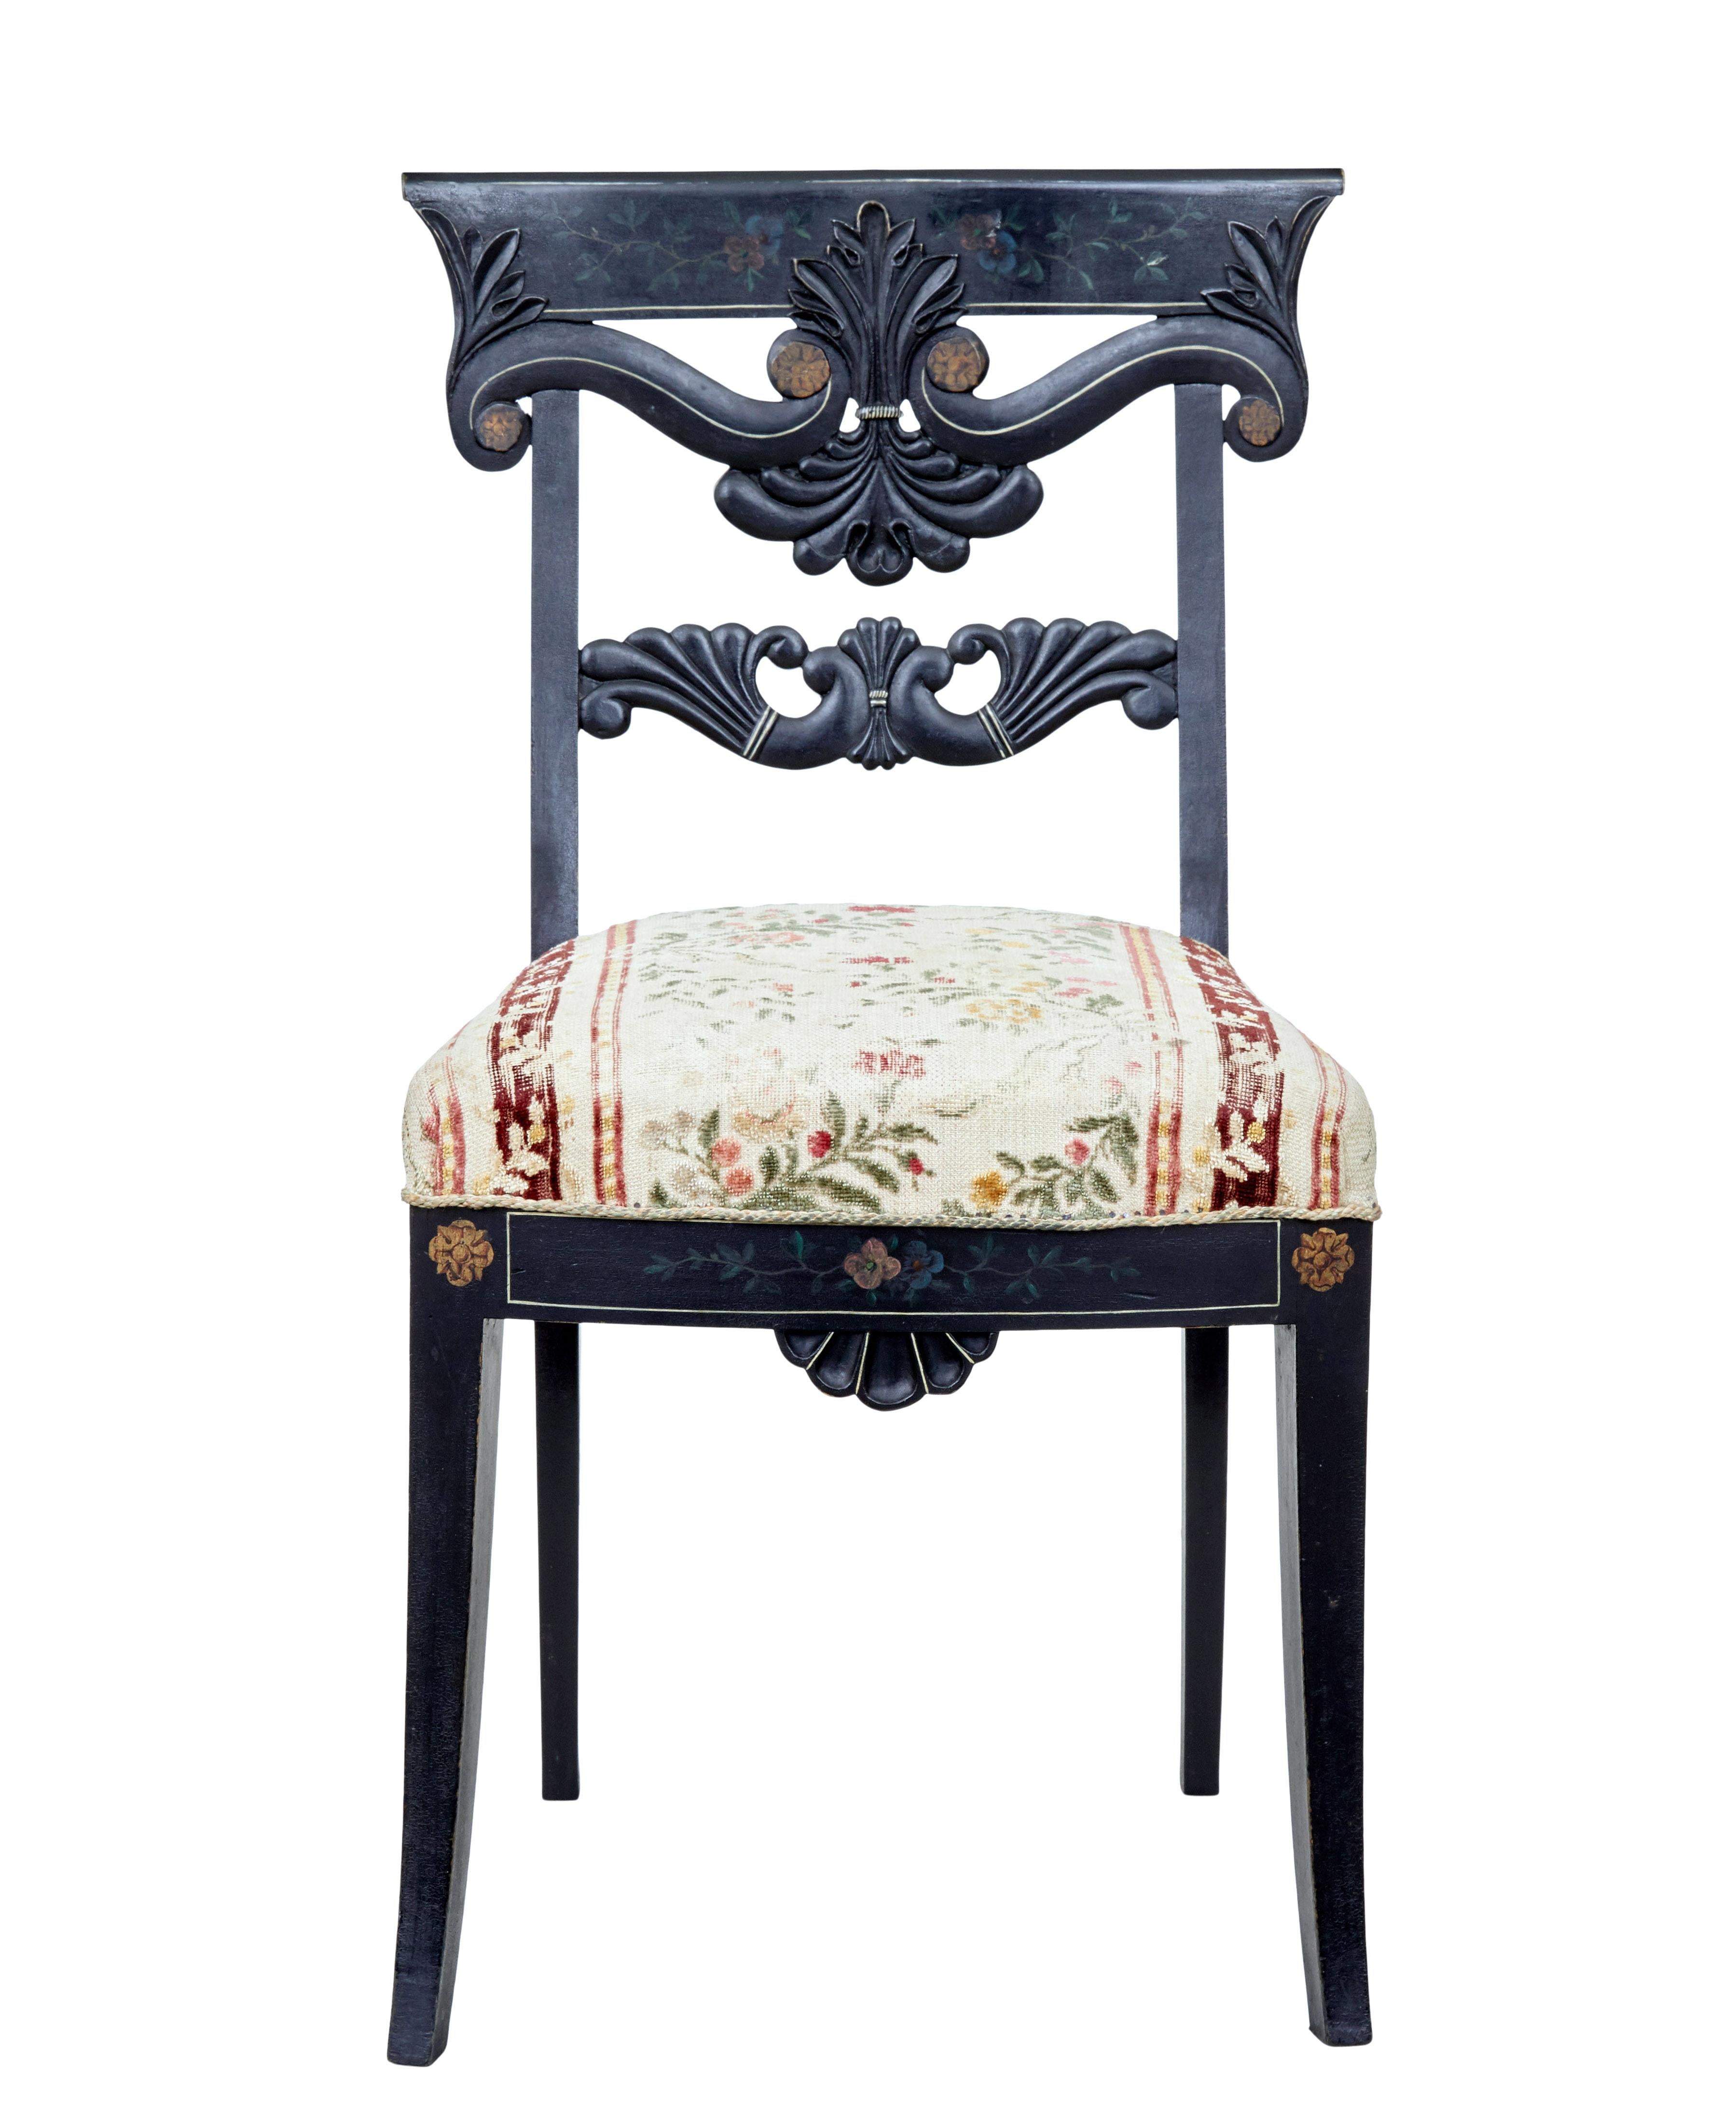 Set of 6 Scandinavian carved and hand painted dining chairs, circa 1890.

Fine set of chairs made from solid beech, painted black with hand painted elements to the backrest and front rail. Carved scrolling backrest and shell detail to front